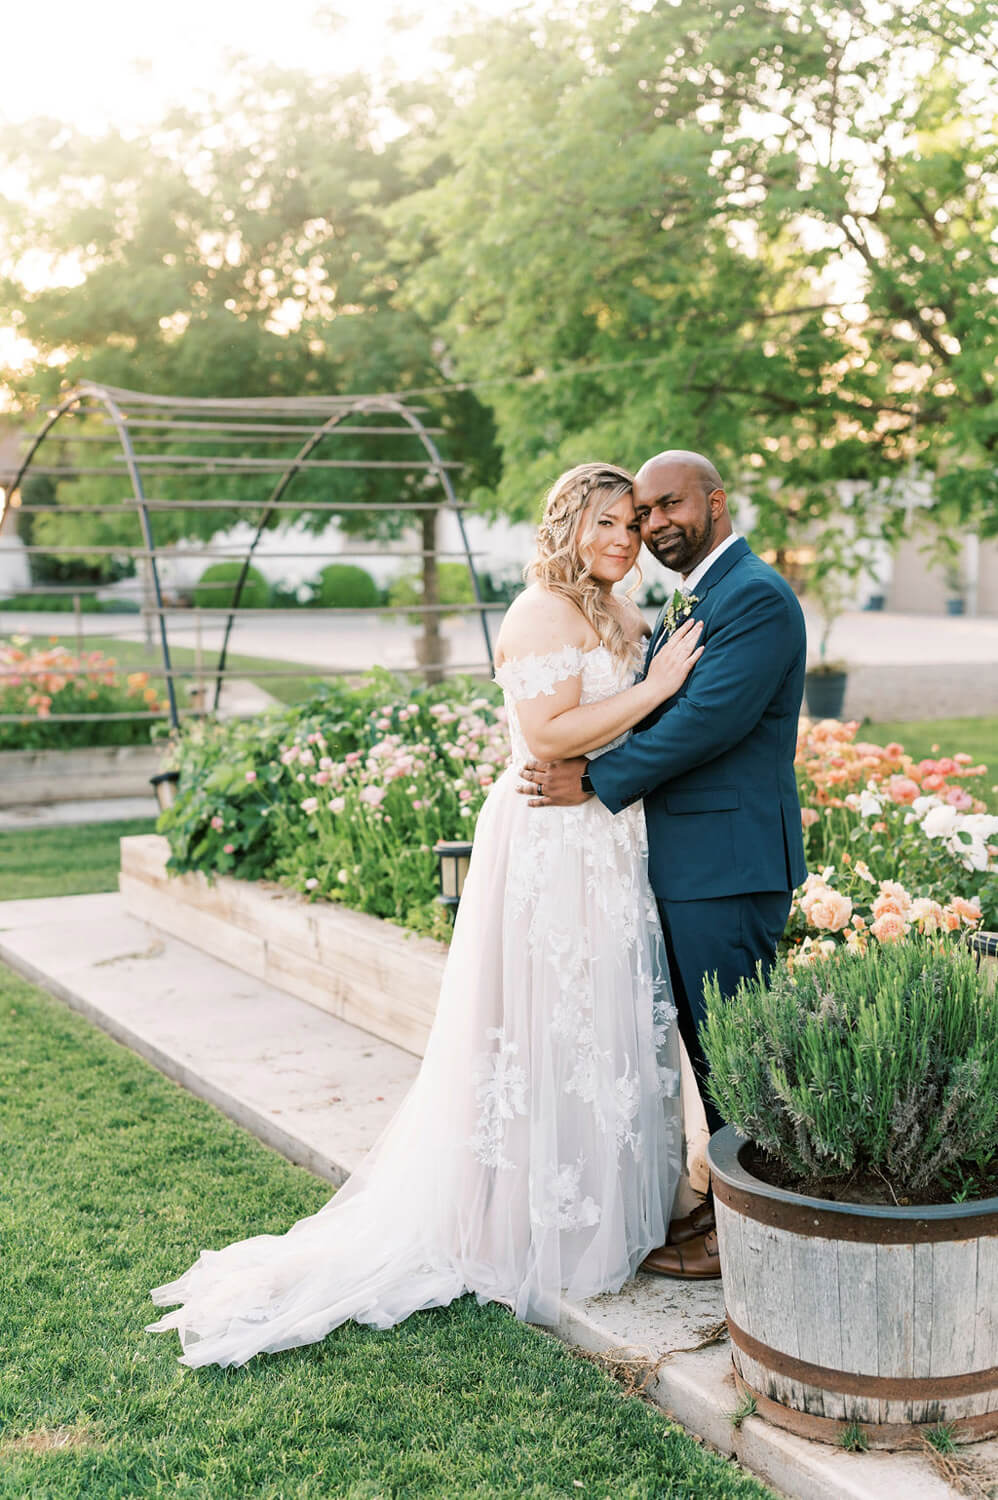 Golden hour portraits at Westwood Barns wedding in California